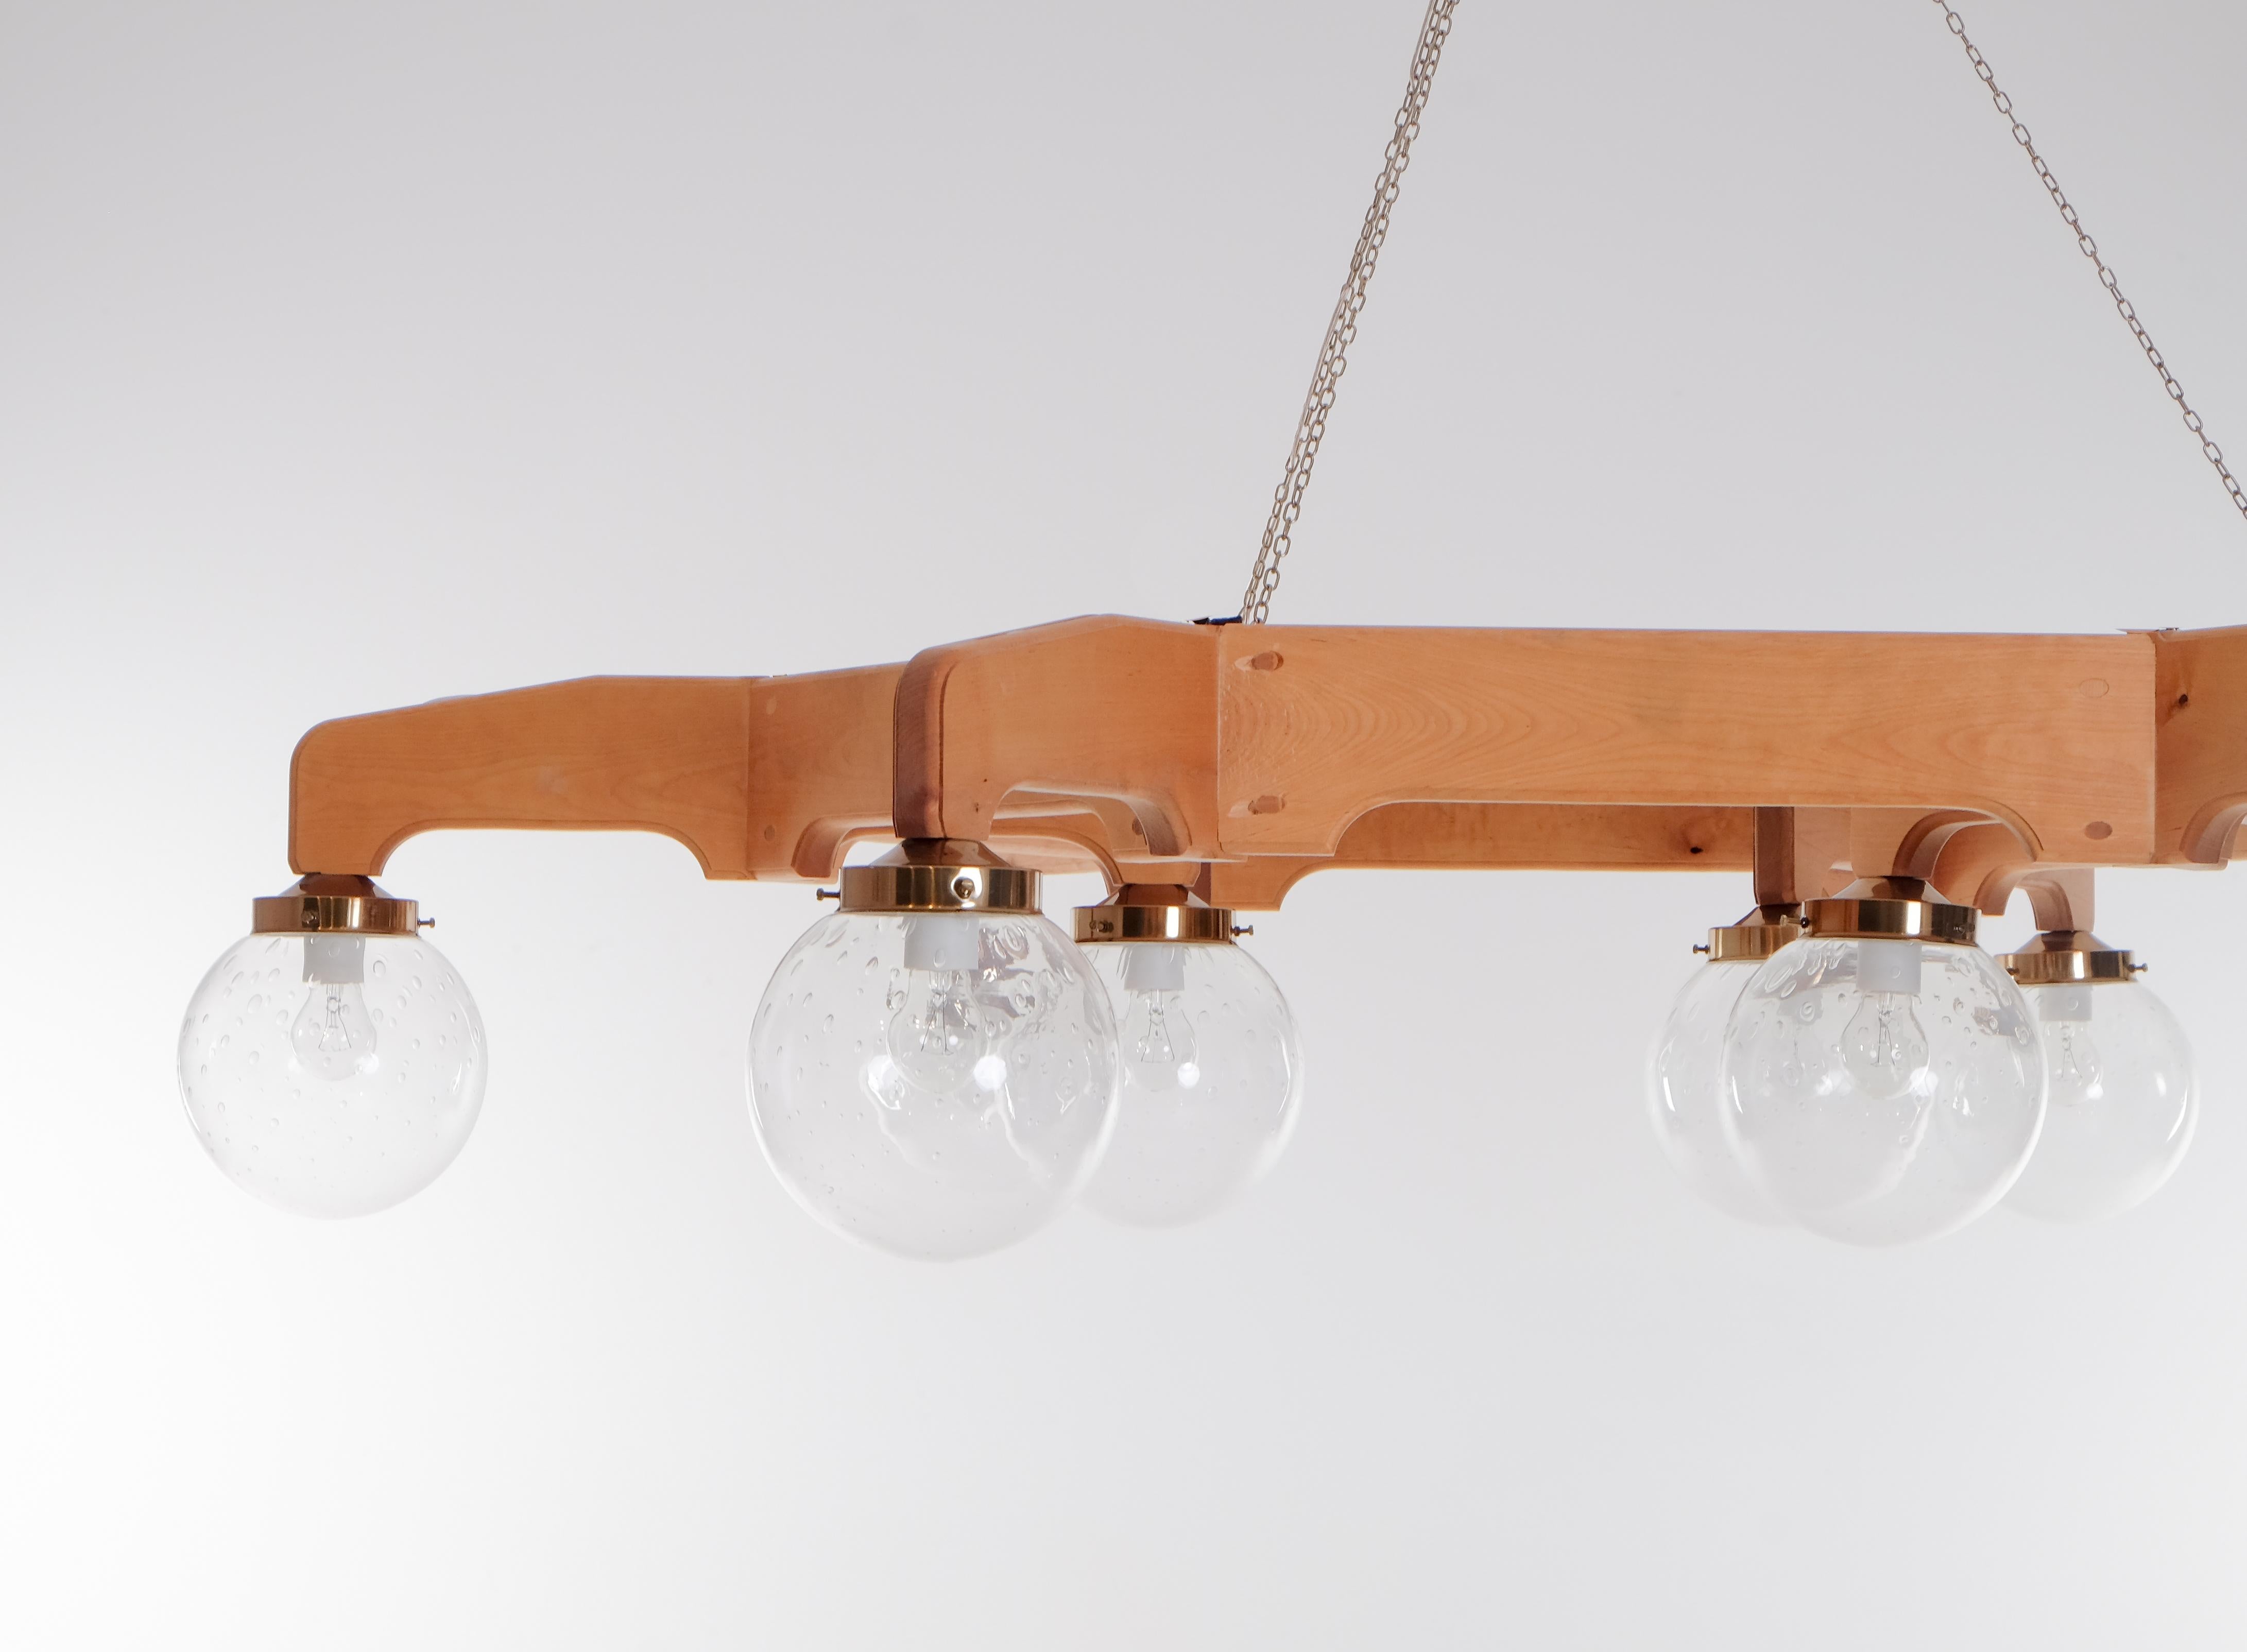 Set of 4 Exceptional Swedish Ceiling Lights in pine, 1970s For Sale 4